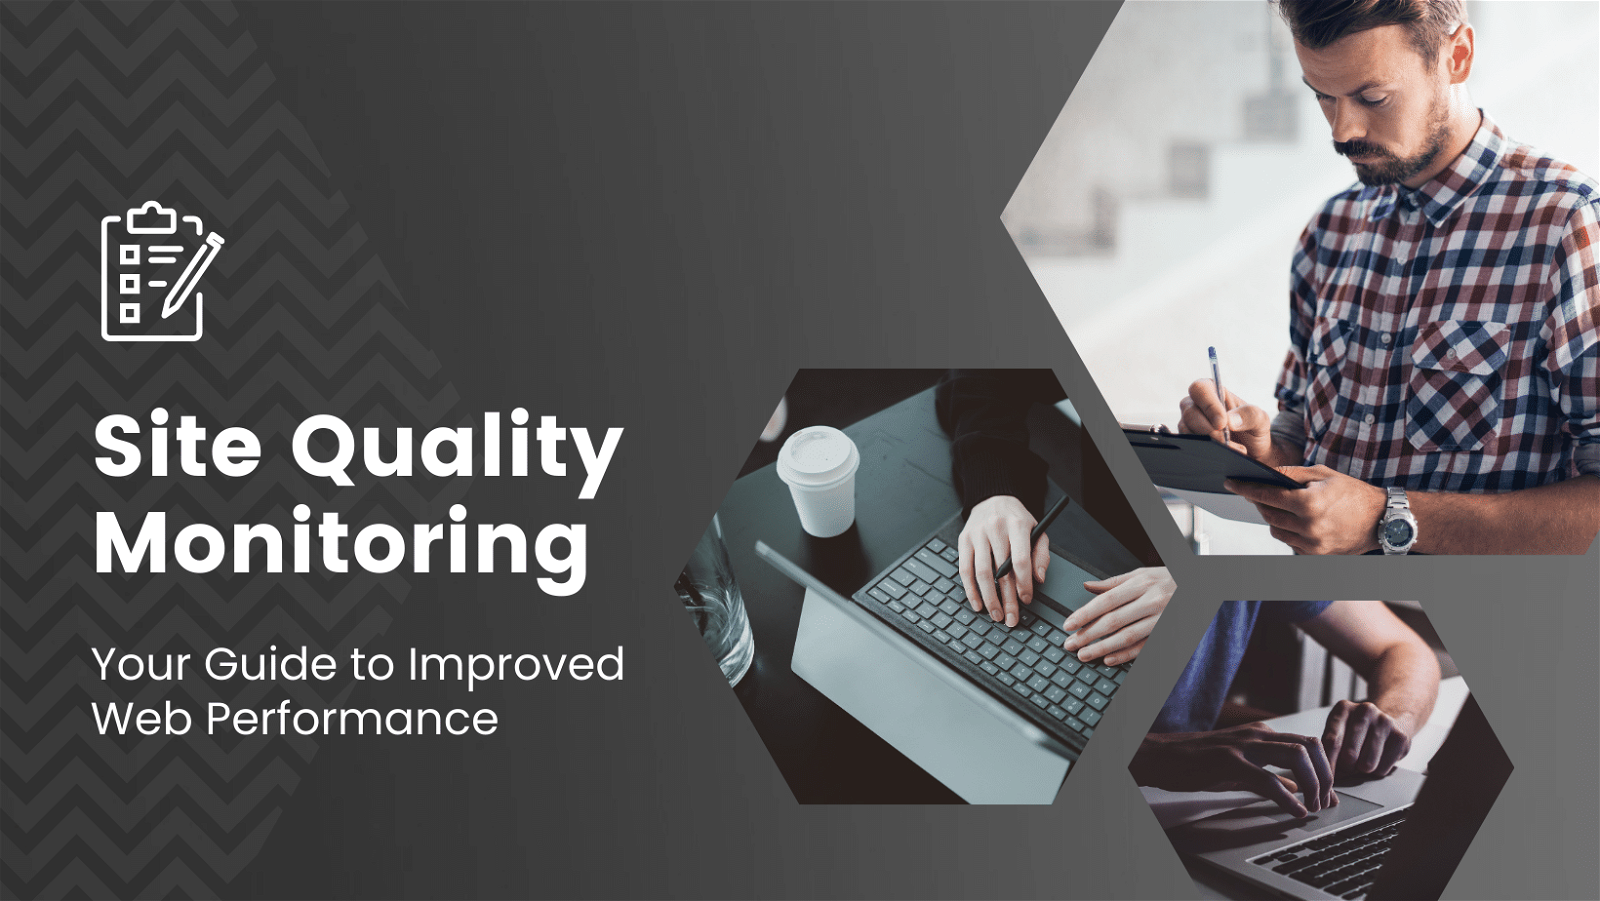 Site quality monitoring your guide to improved web performance.